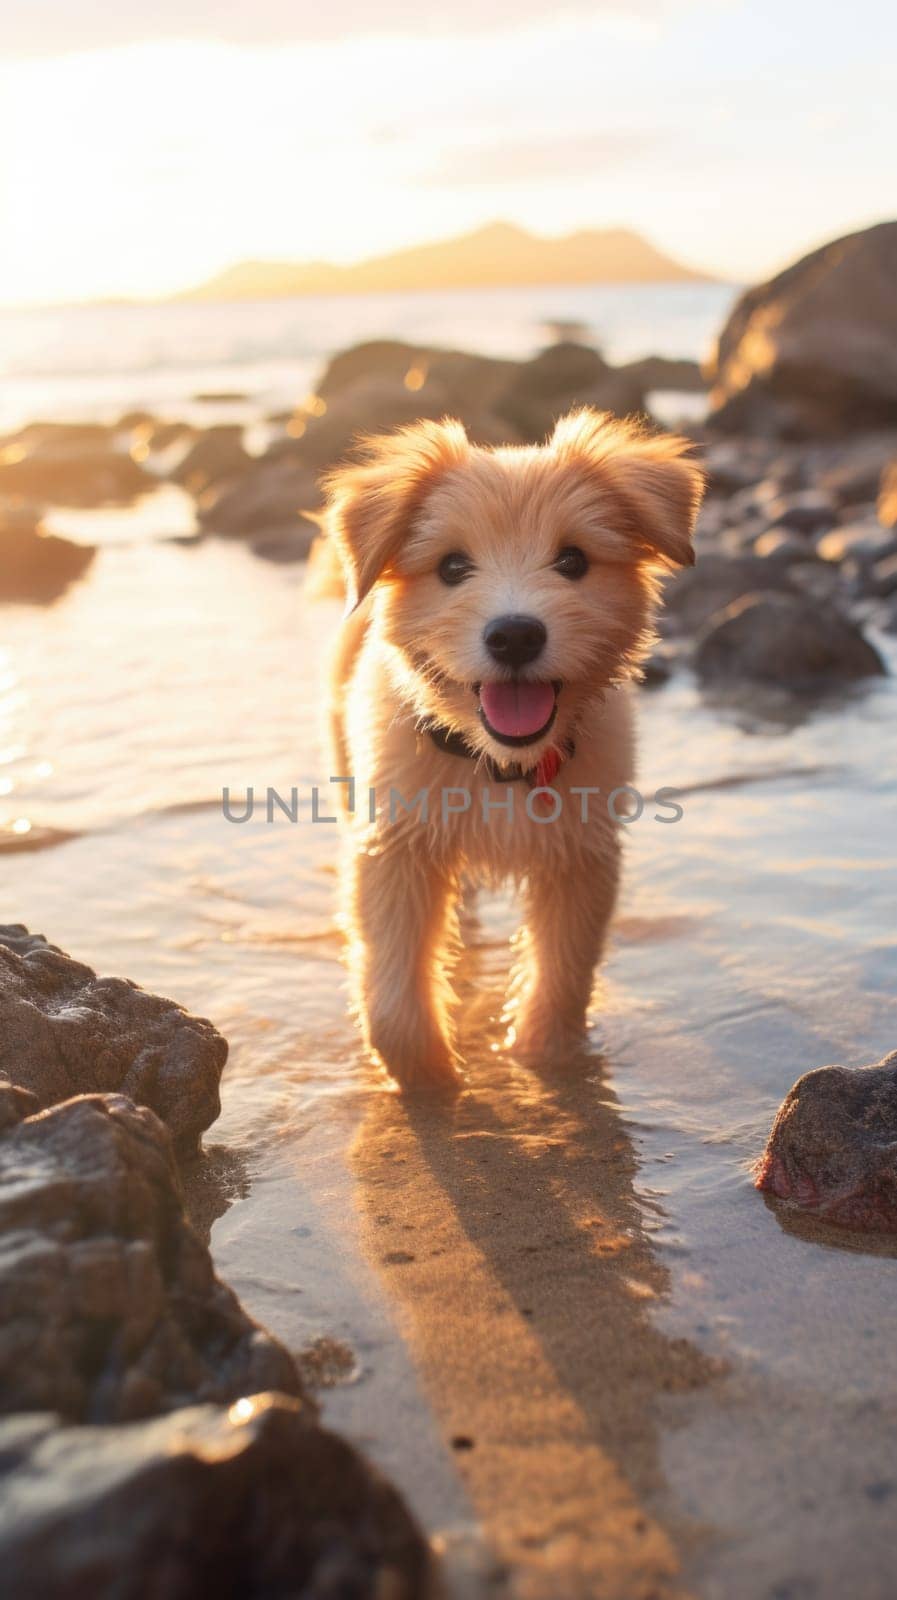 A small dog is walking on the beach at sunset, AI by starush